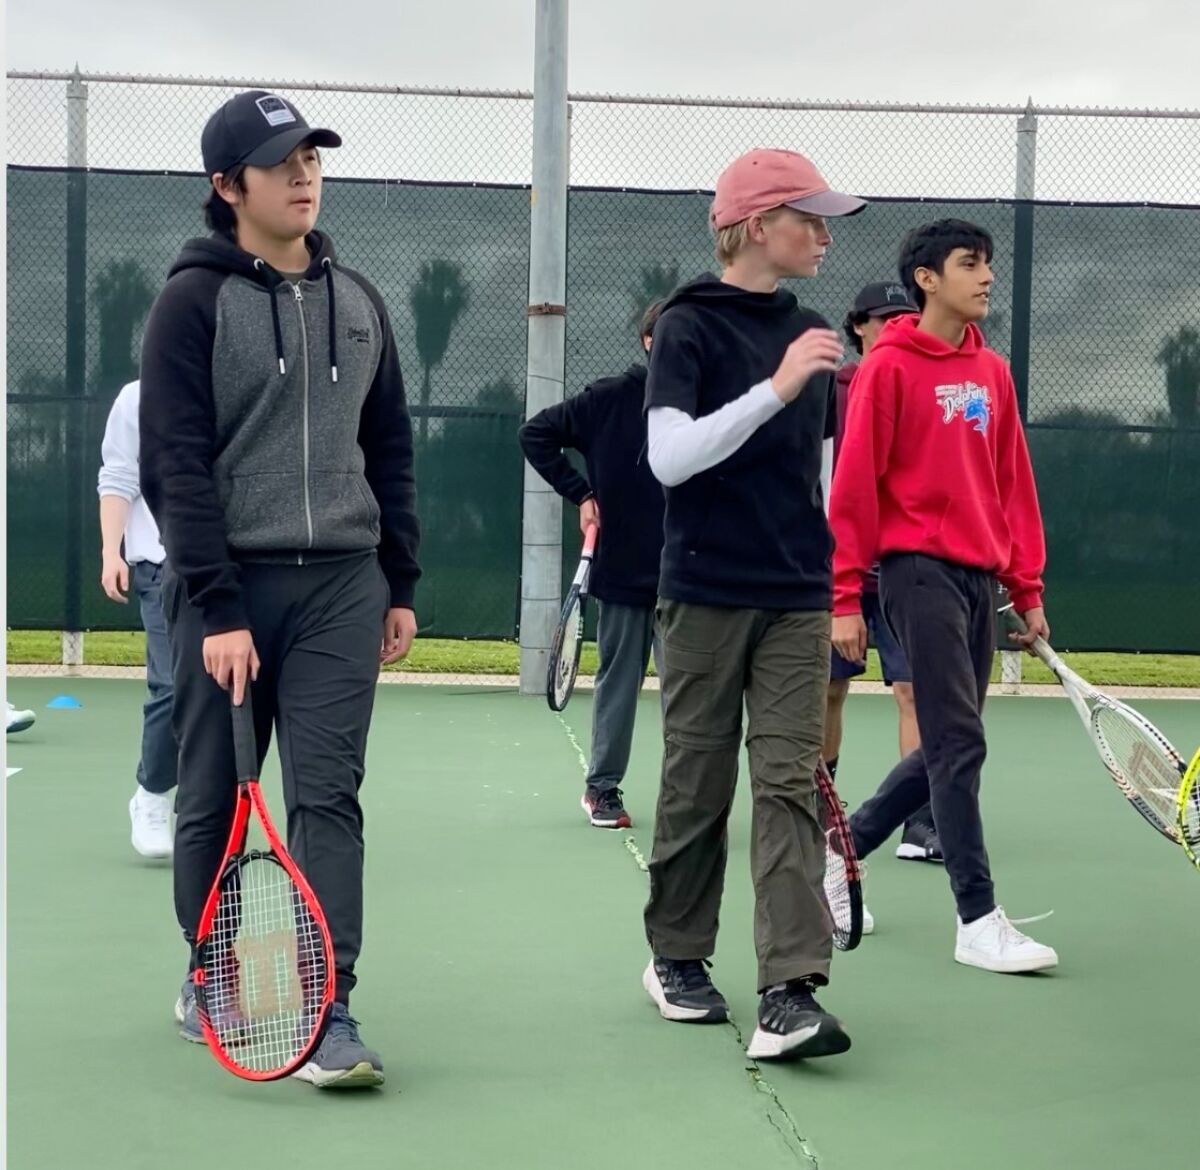 The Point Loma High School boys tennis team takes to the Peninsula Tennis Club courts for an early-morning practice session.